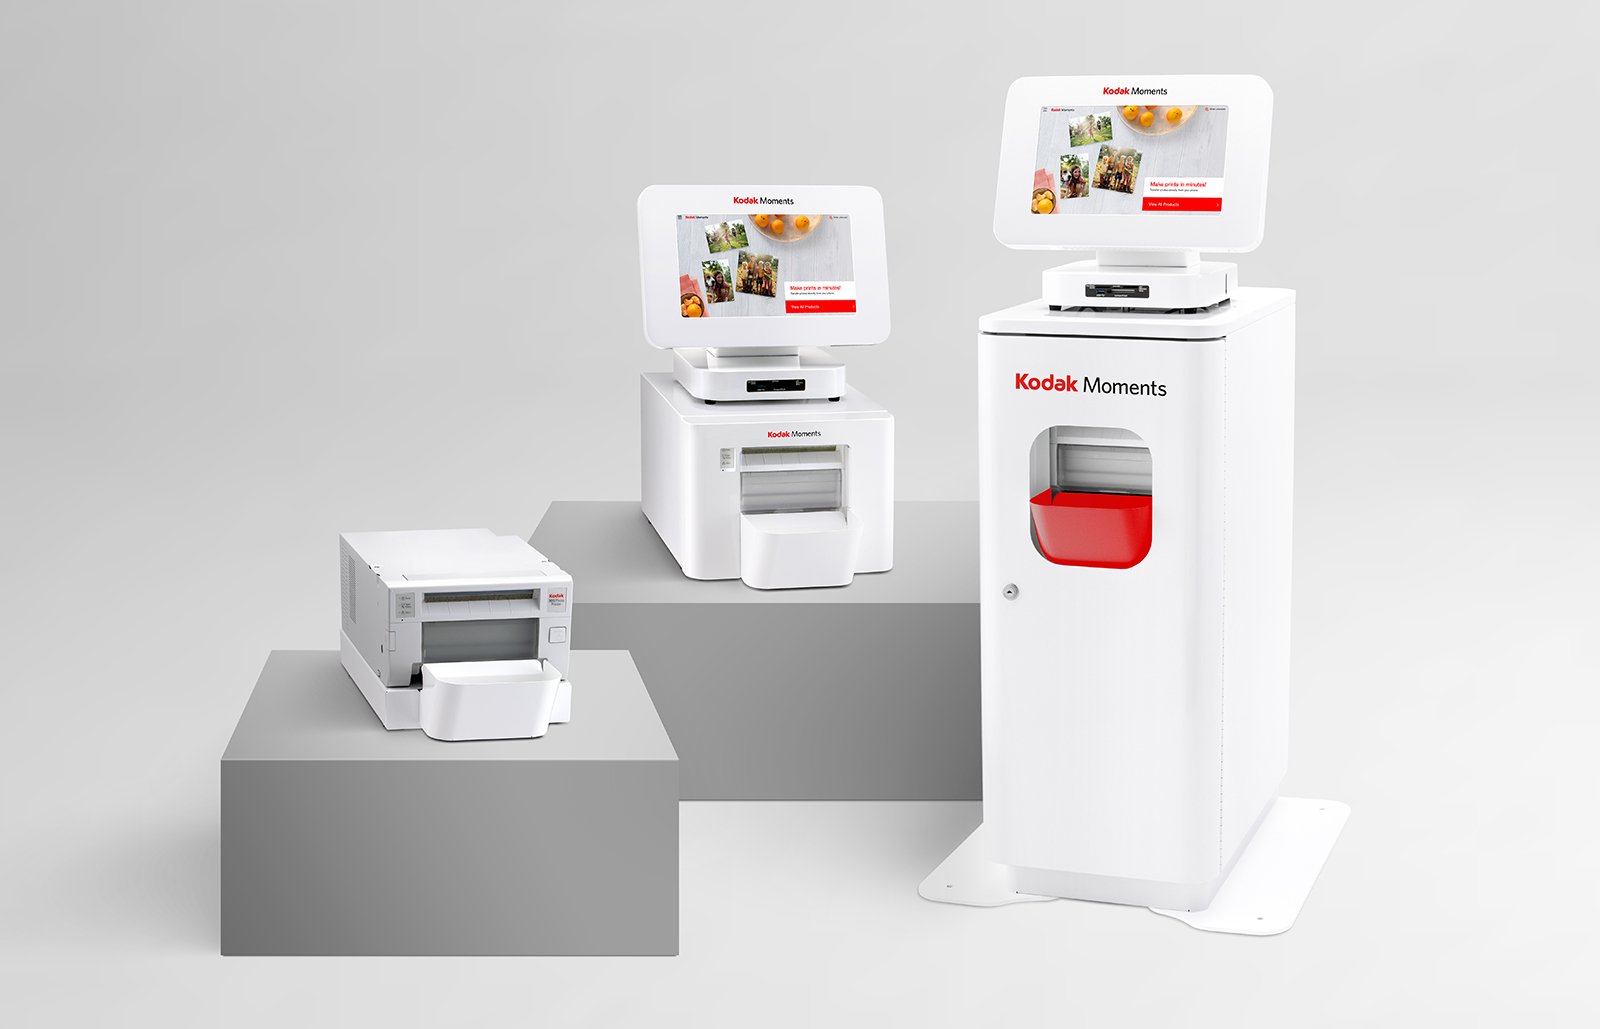 Kodak is Trying to Bring Back the Photo Kiosk with the M1 Order Station